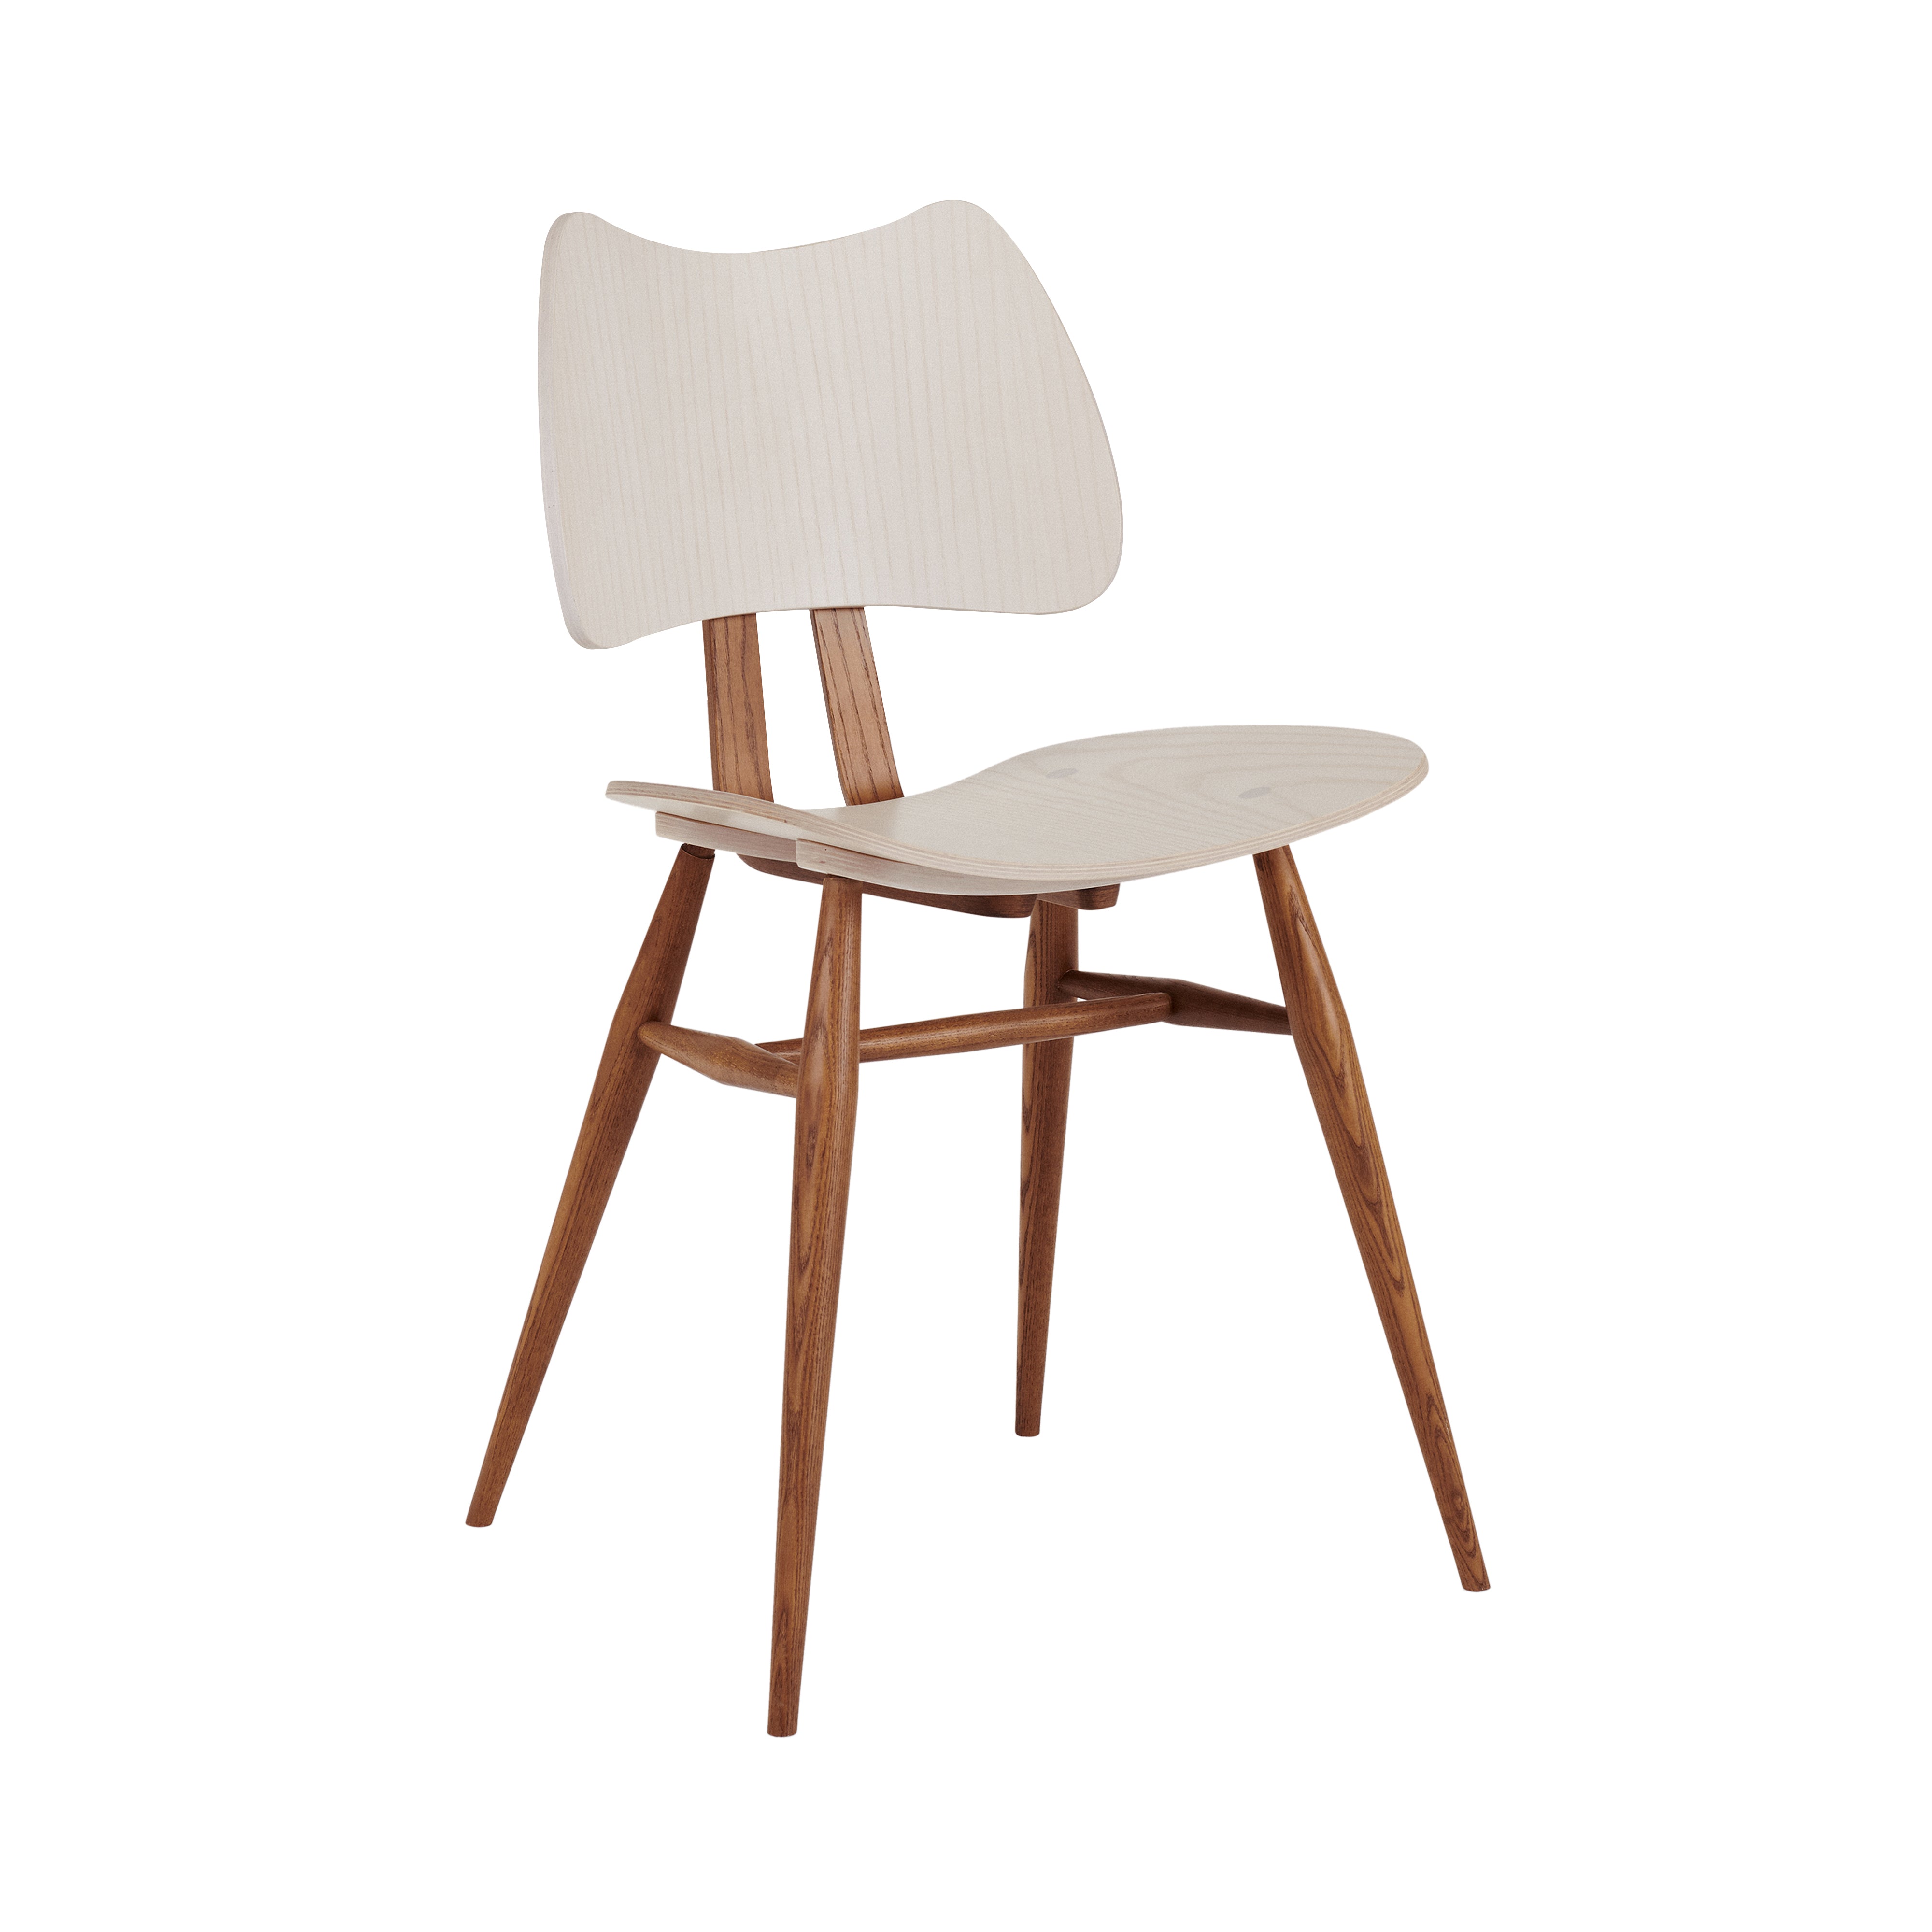 Originals Butterfly Chair: Stained Off White + Stained Original Ash